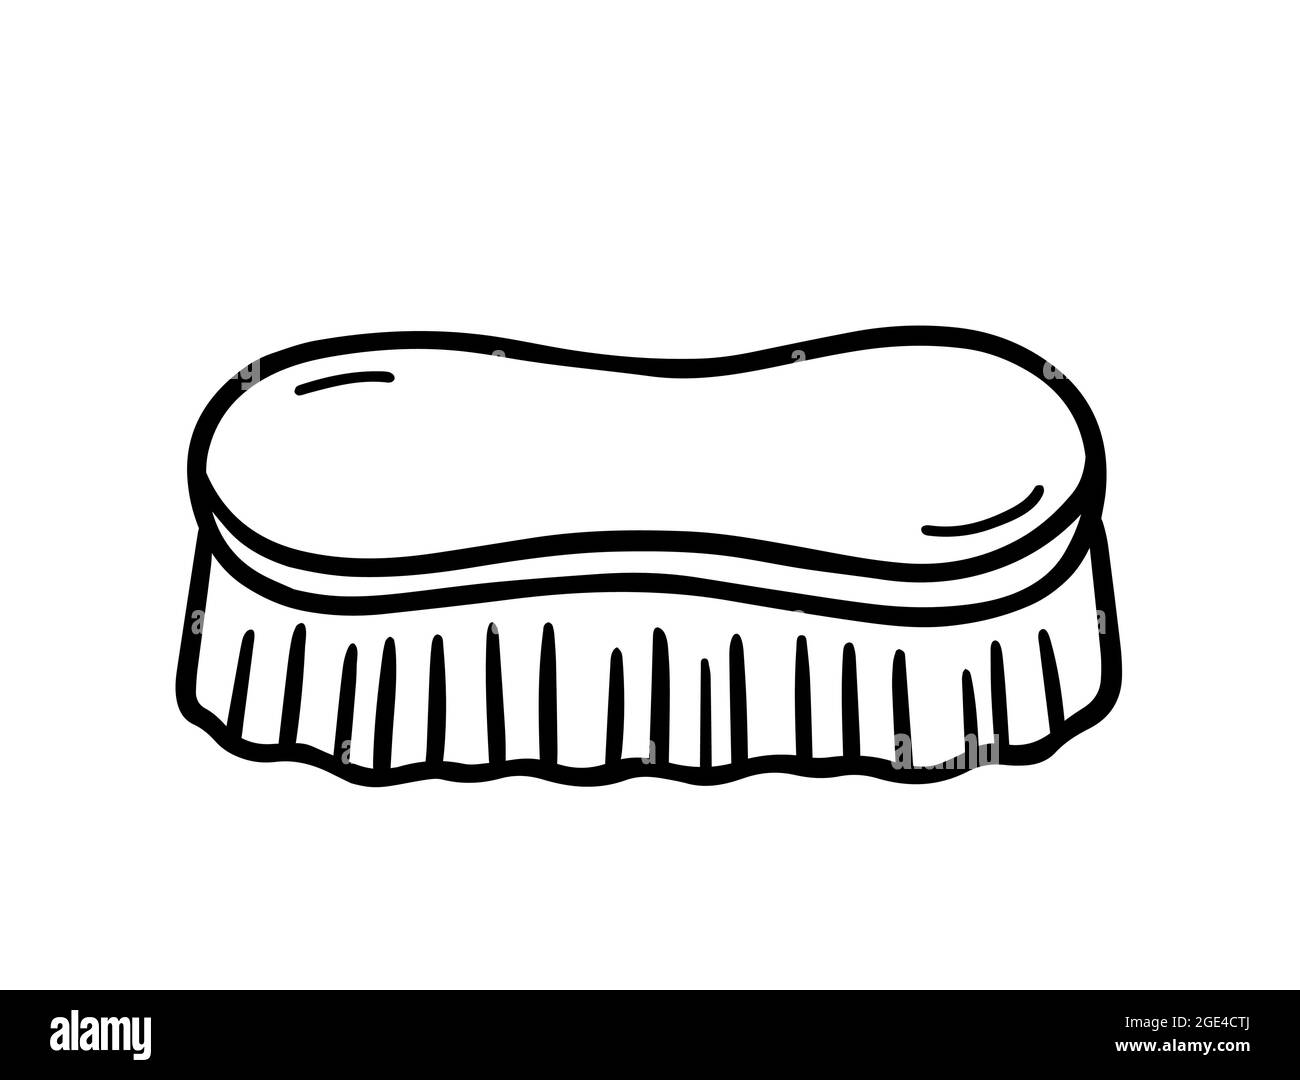 Wooden scrub brush for cleaning isolated on white background. Vector hand-drawn illustration in doodle style. Suitable for your projects, decorations, Stock Vector